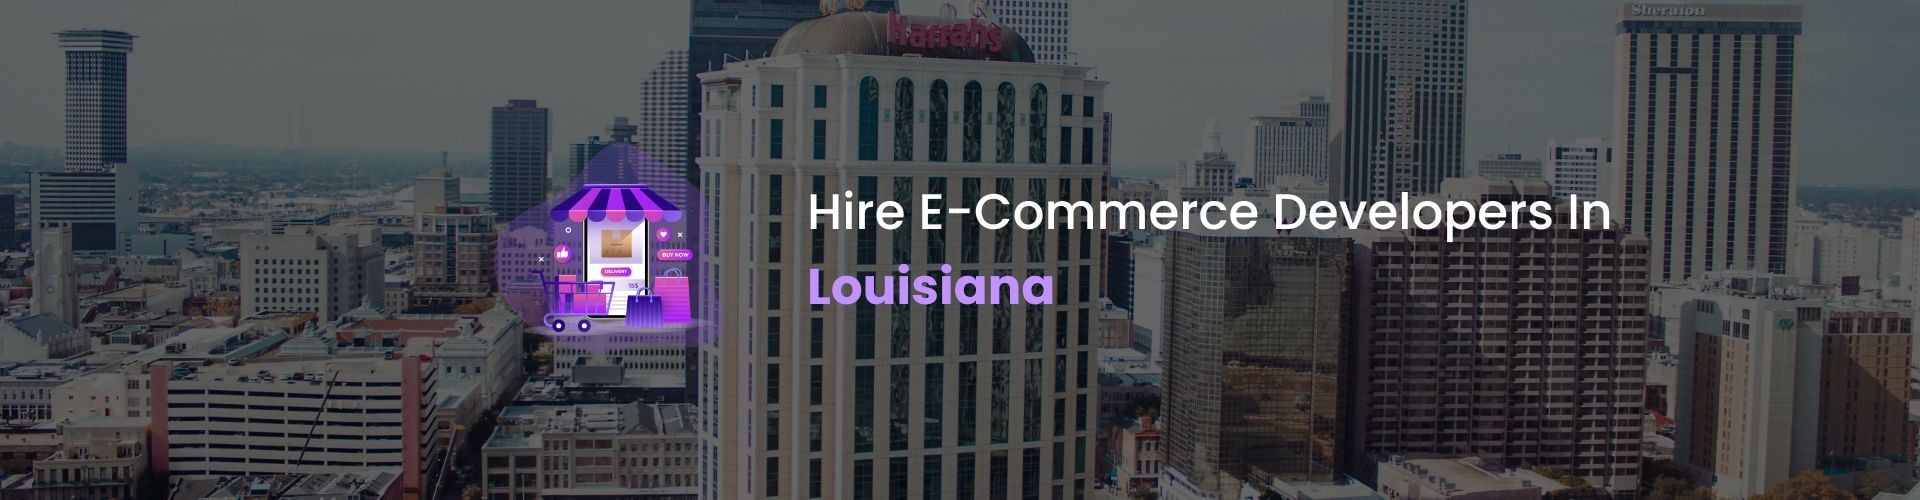 hire ecommerce developers in louisiana